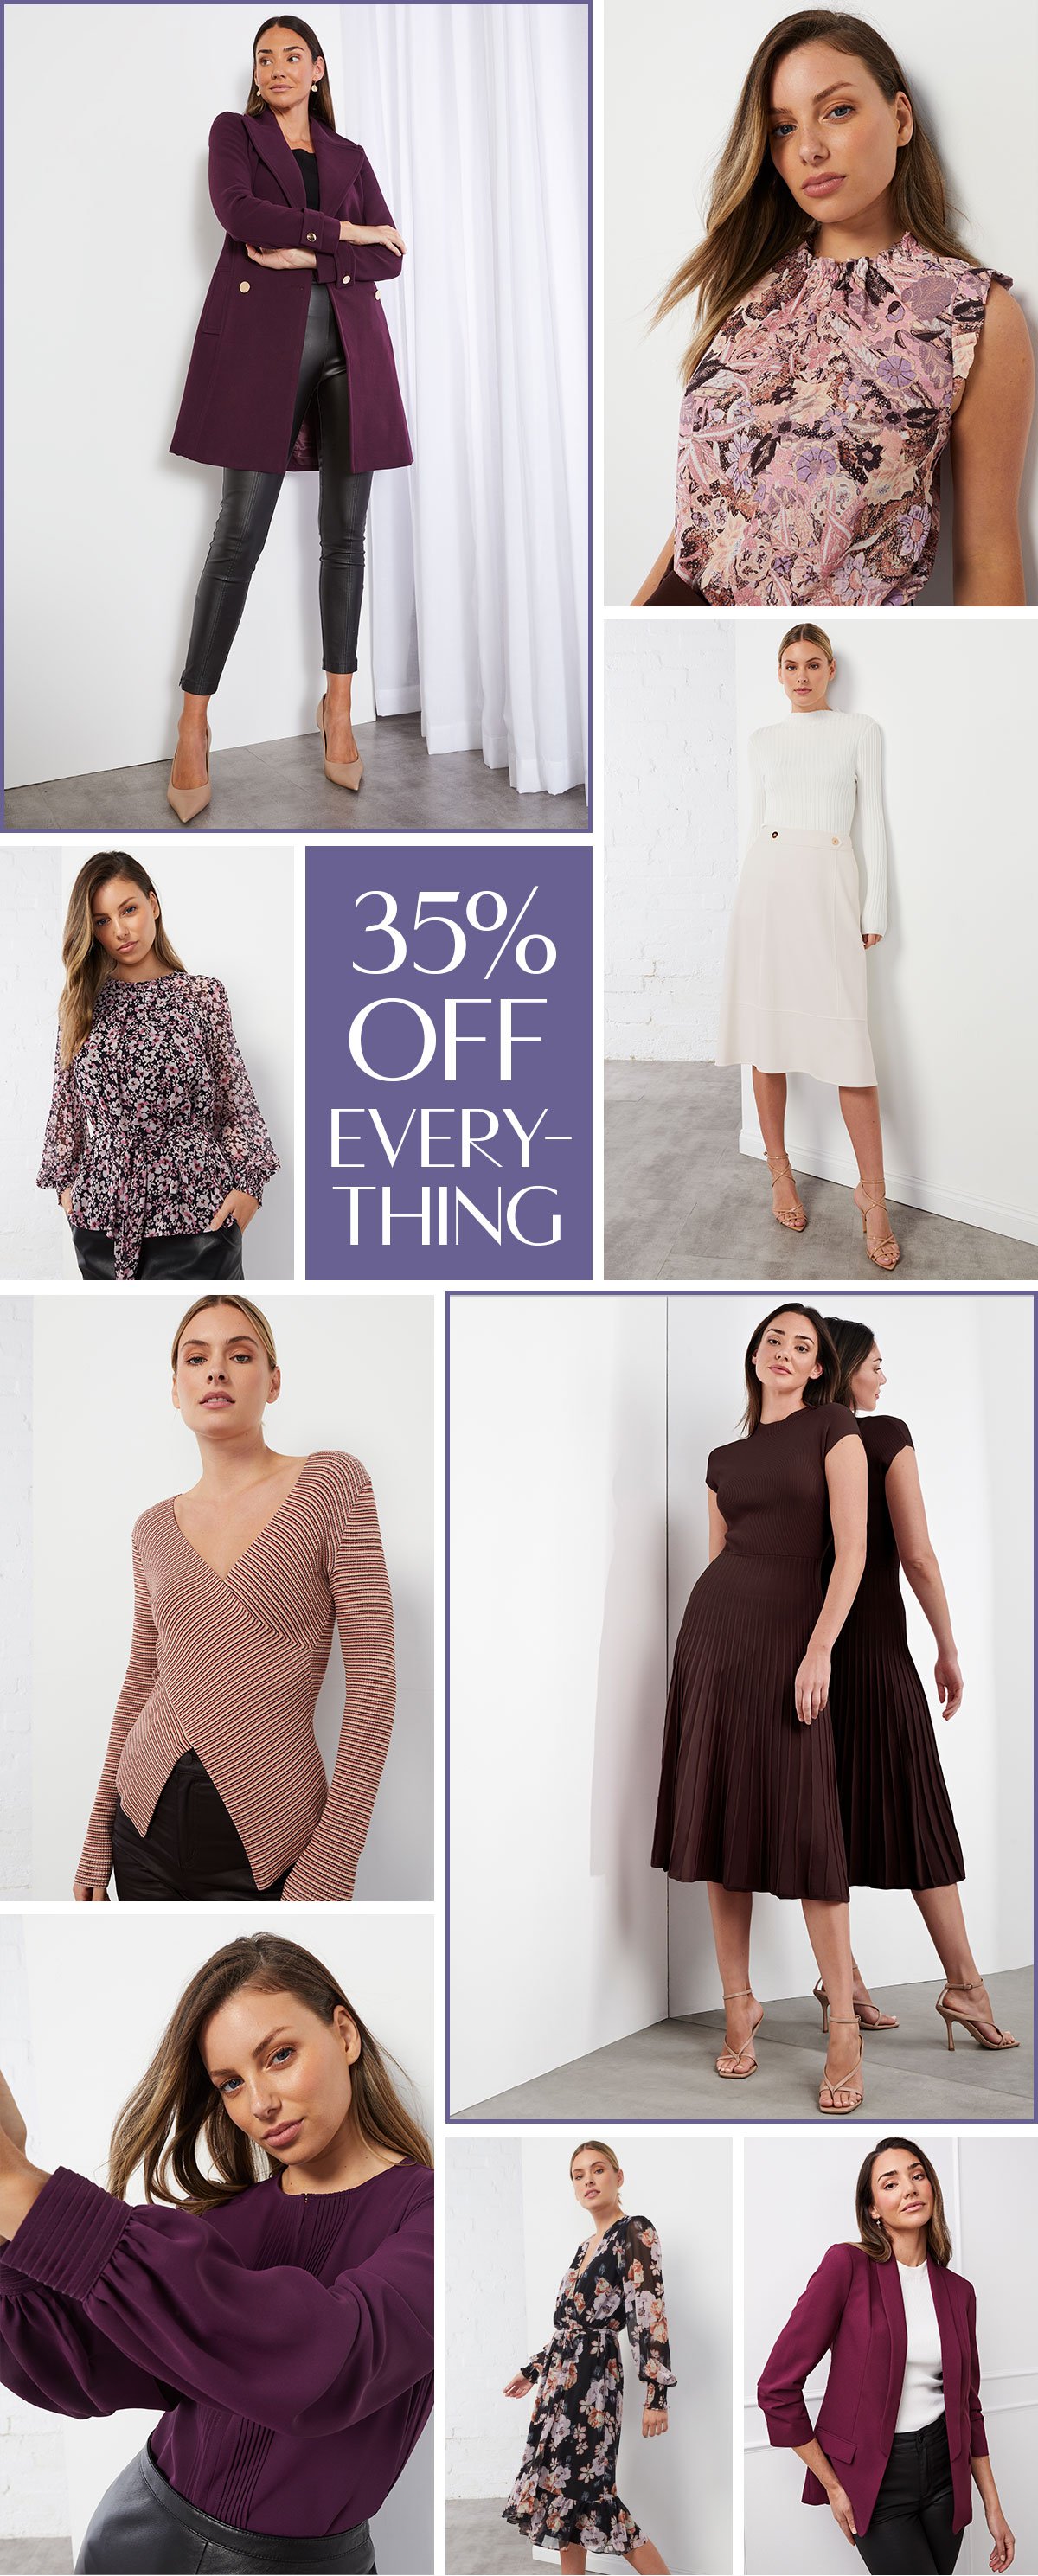 35% Off Everything.